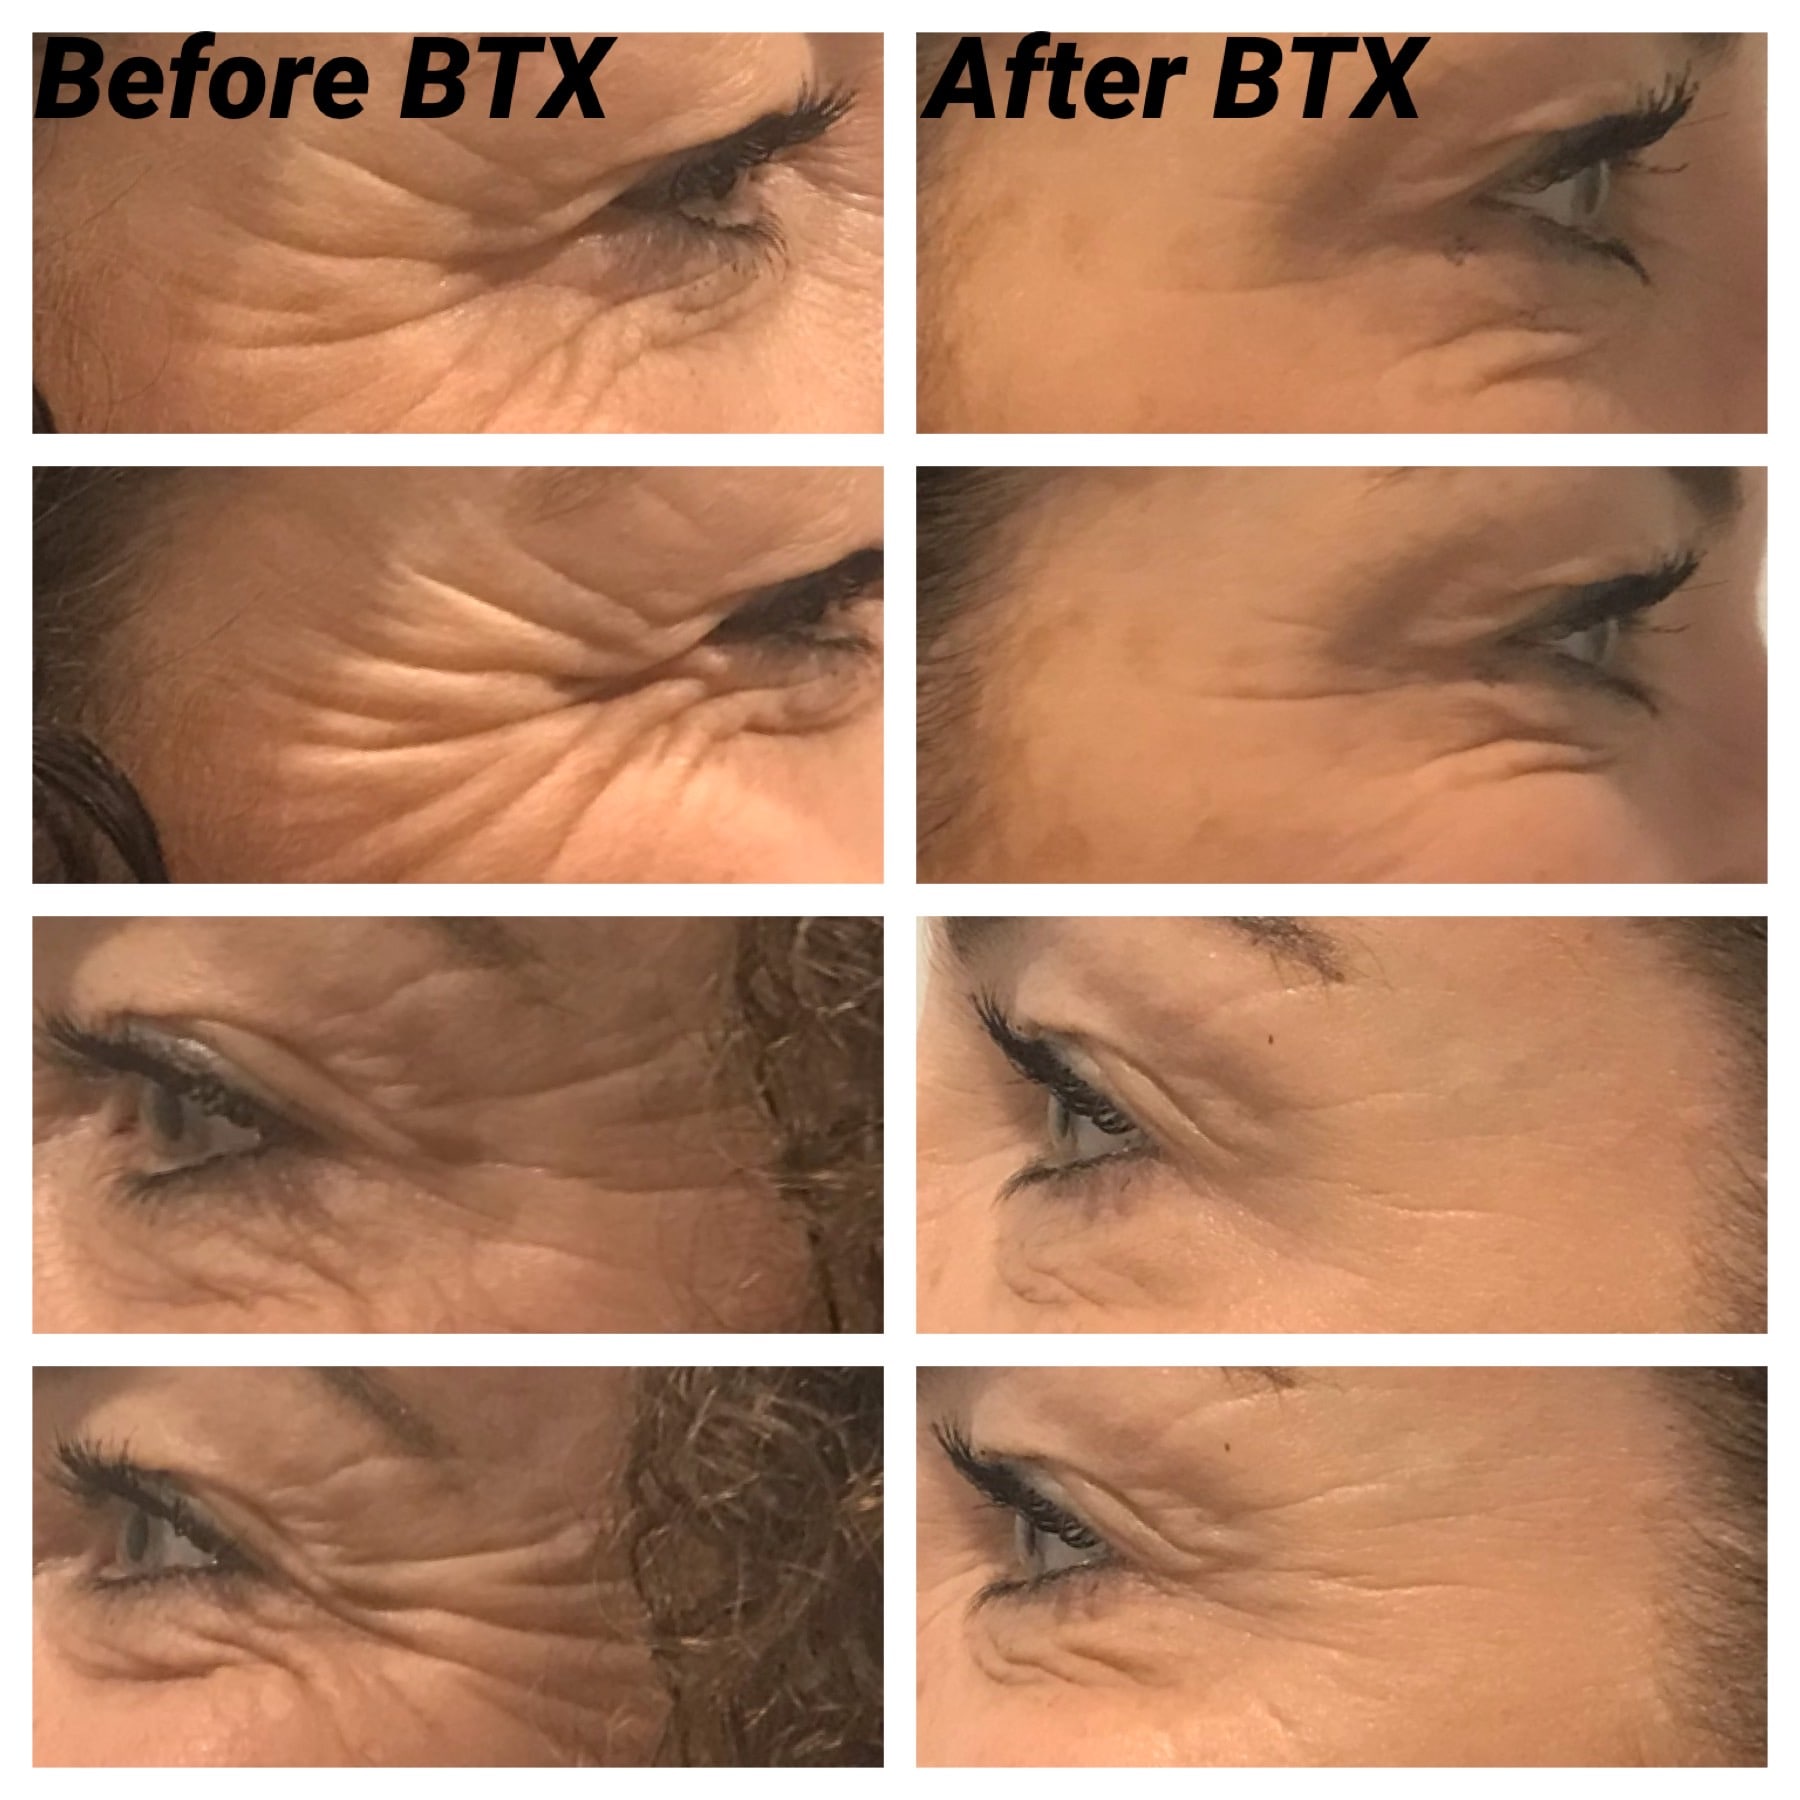 Botox, before after botox injection treatment wrinkles, anti aging, facial lines forehead eyebrow lift